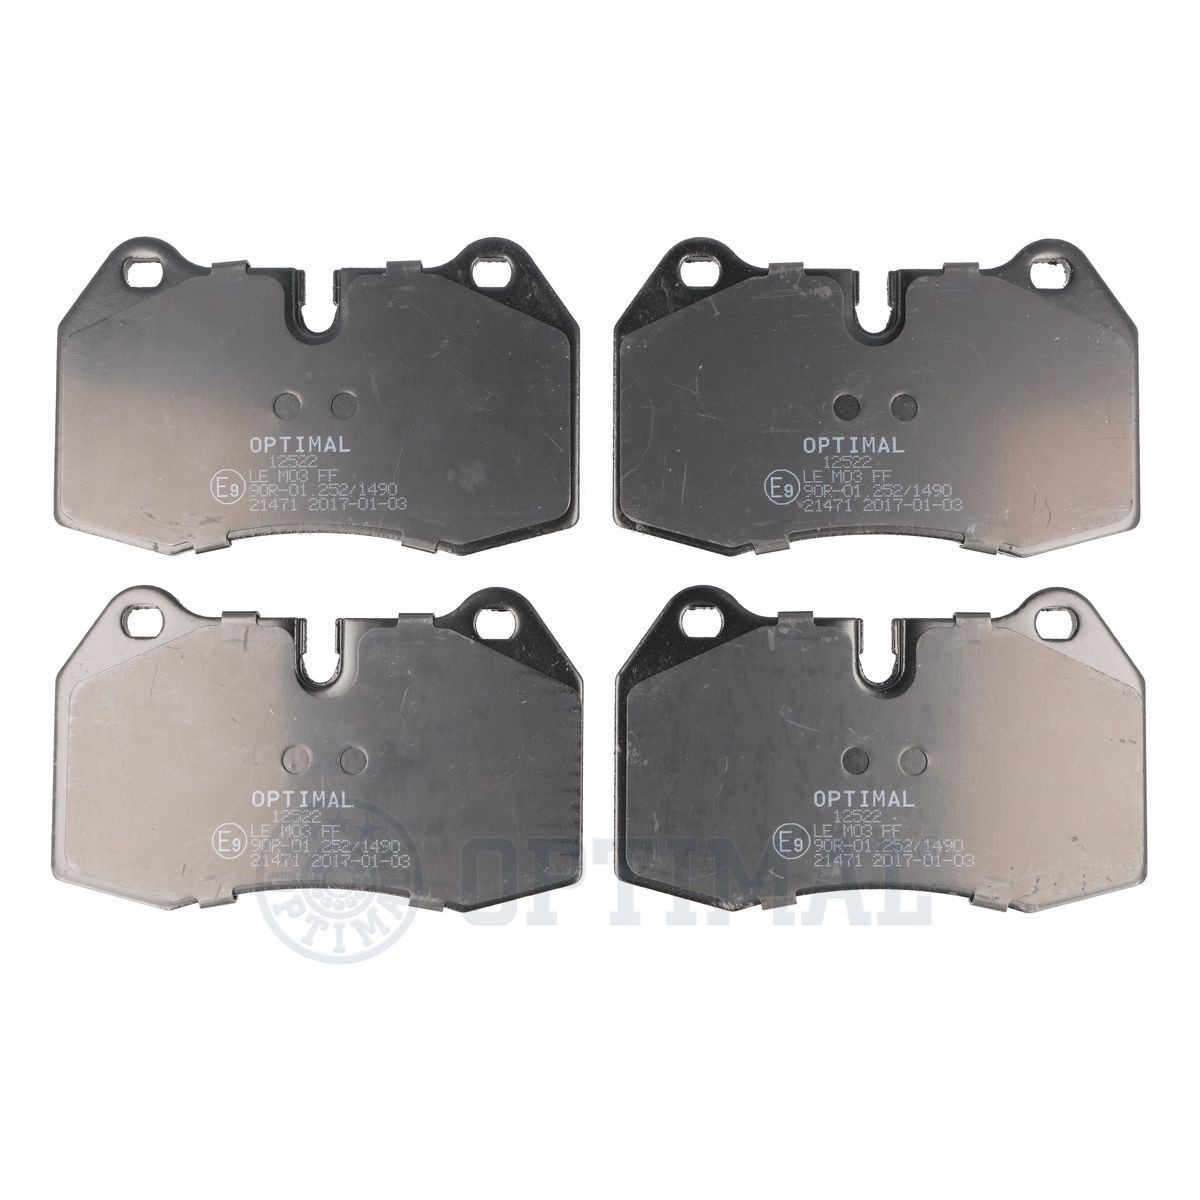 OPTIMAL BP-12522 Brake pad set Front Axle, prepared for wear indicator, excl. wear warning contact